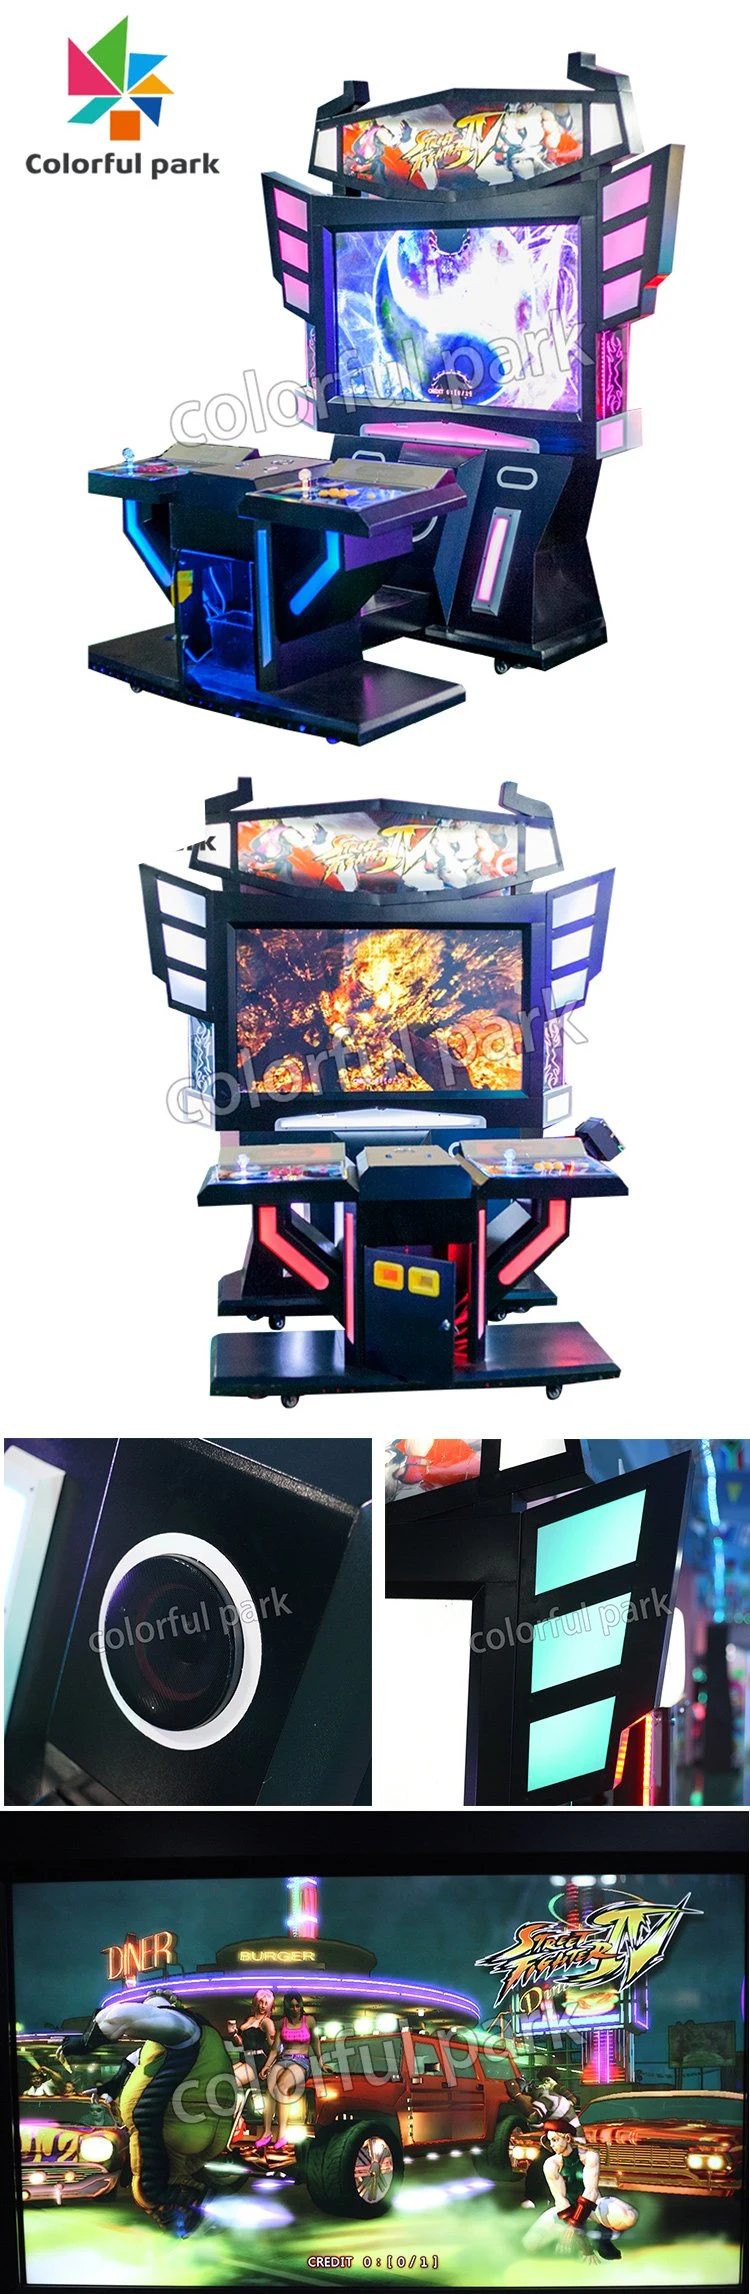 Colorful Park Coin Operated Video Street Frighting Game Machine Sport Arcade Game